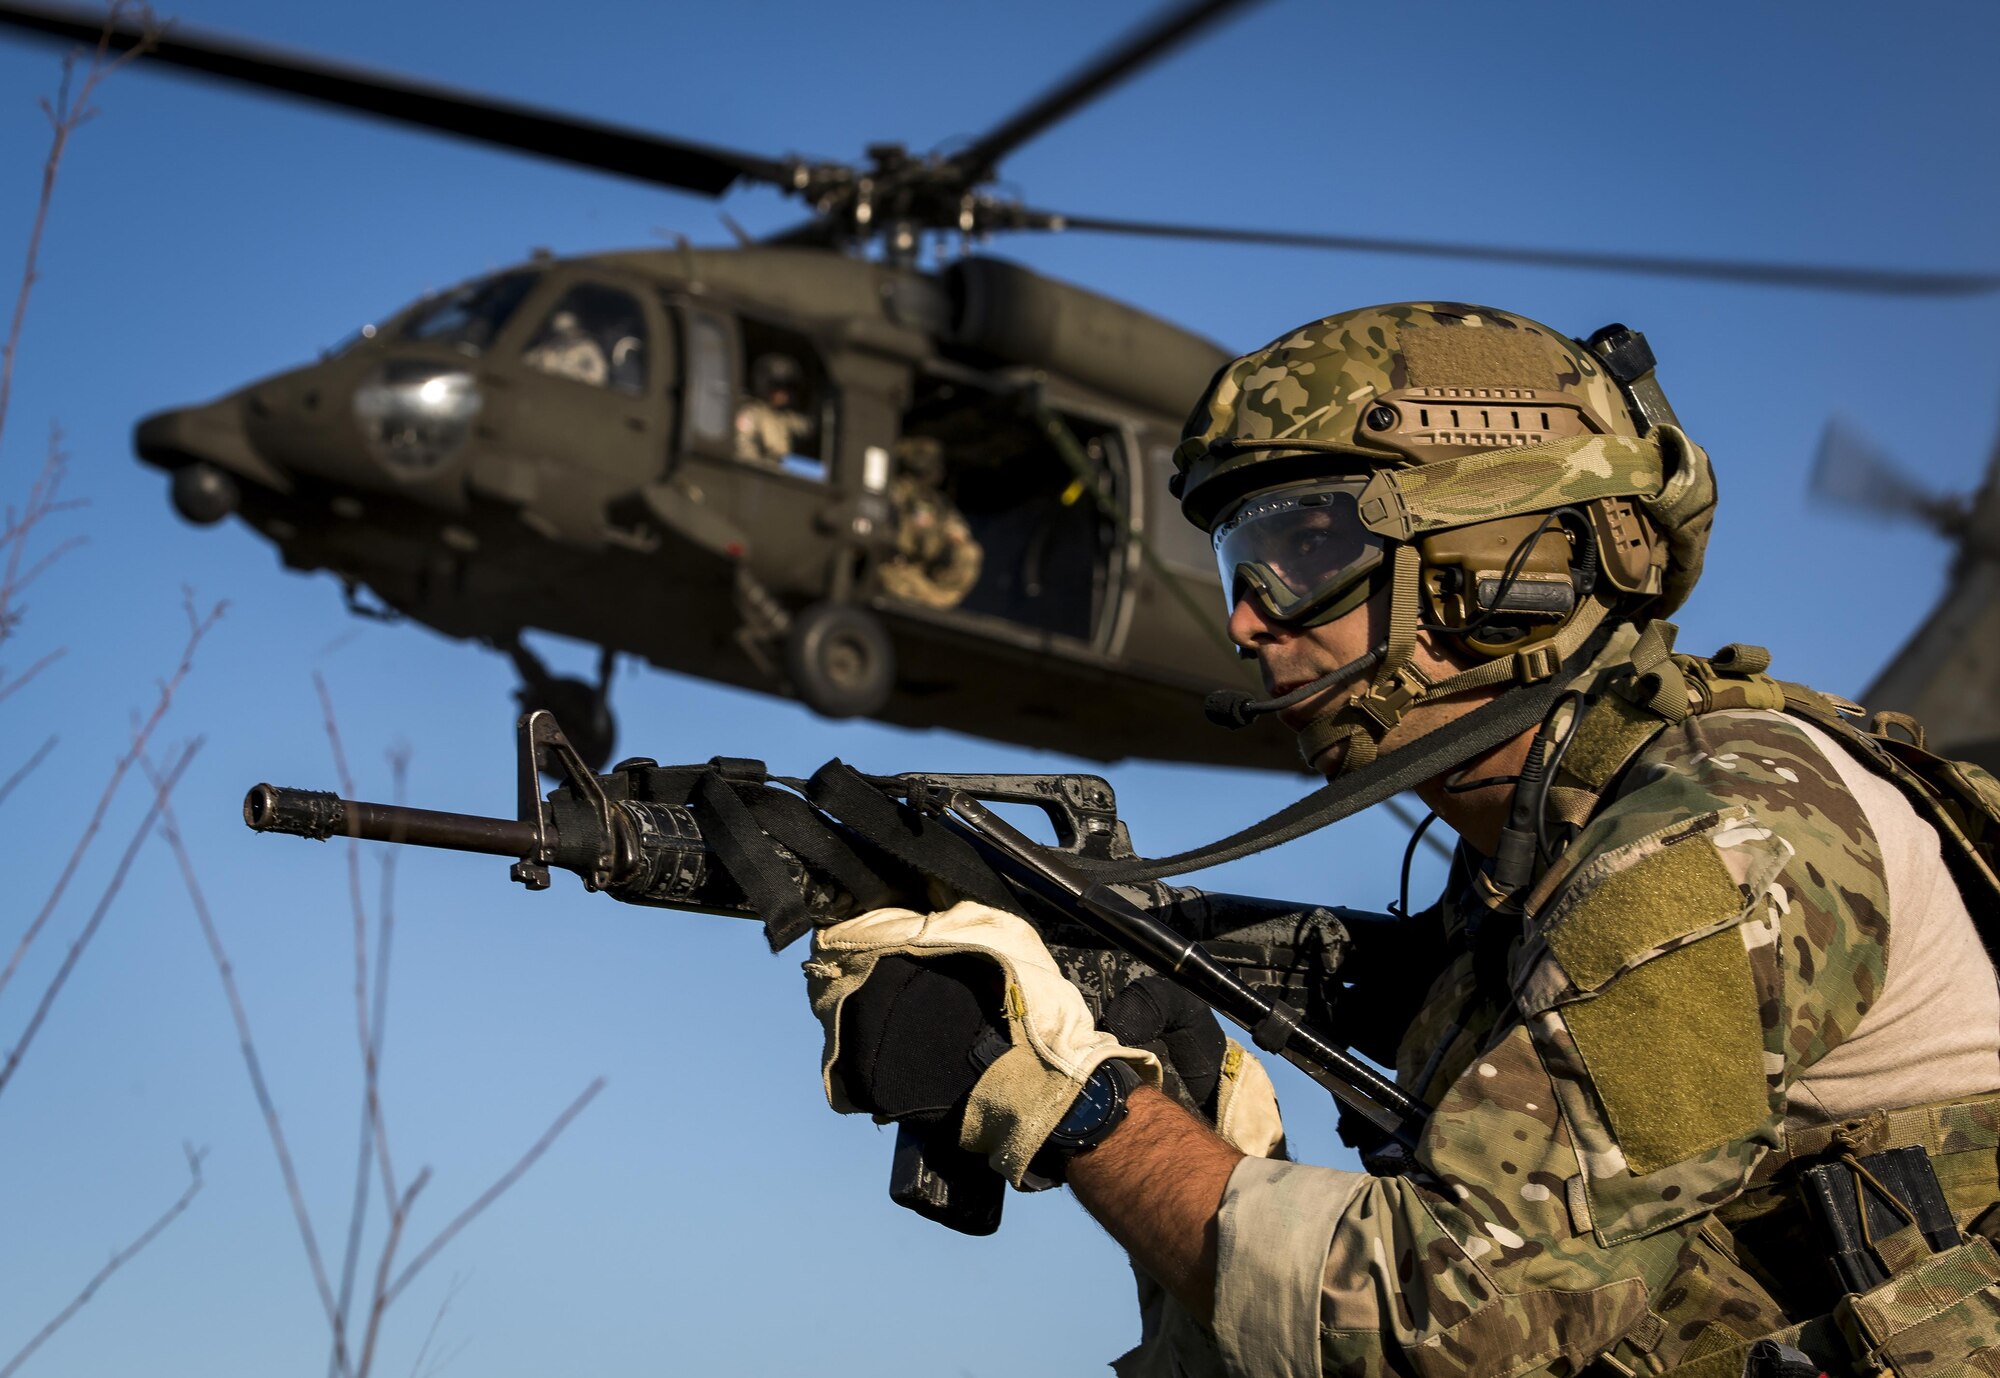 Special Tactics Training Squadron Airmen from the 24th Special Operations Wing fast rope from a U.S. Army UH-60 Black Hawk at Hurlburt Field, Fla., May 4, 2016, during Emerald Warrior 16. Emerald Warrior is a U.S. Special Operations Command sponsored mission rehearsal exercise during which joint special operations forces train to respond to real and emerging worldwide threats. (U.S. Air Force photo by Senior Airman Trevor T. McBride)                     